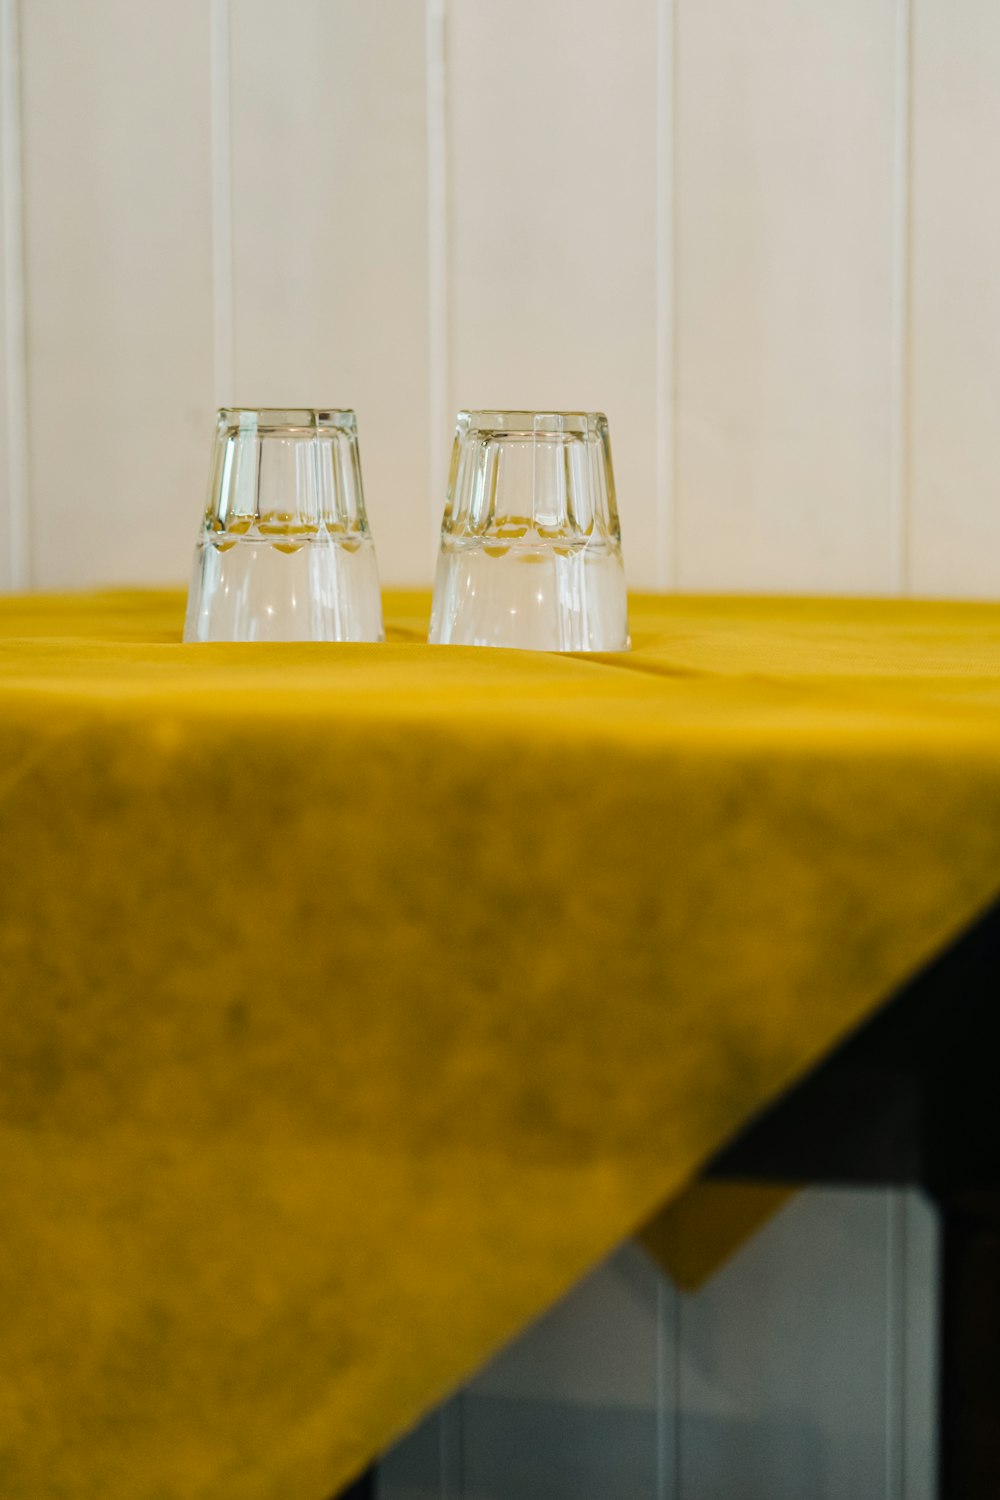 2 clear glass condiment shakers on yellow table